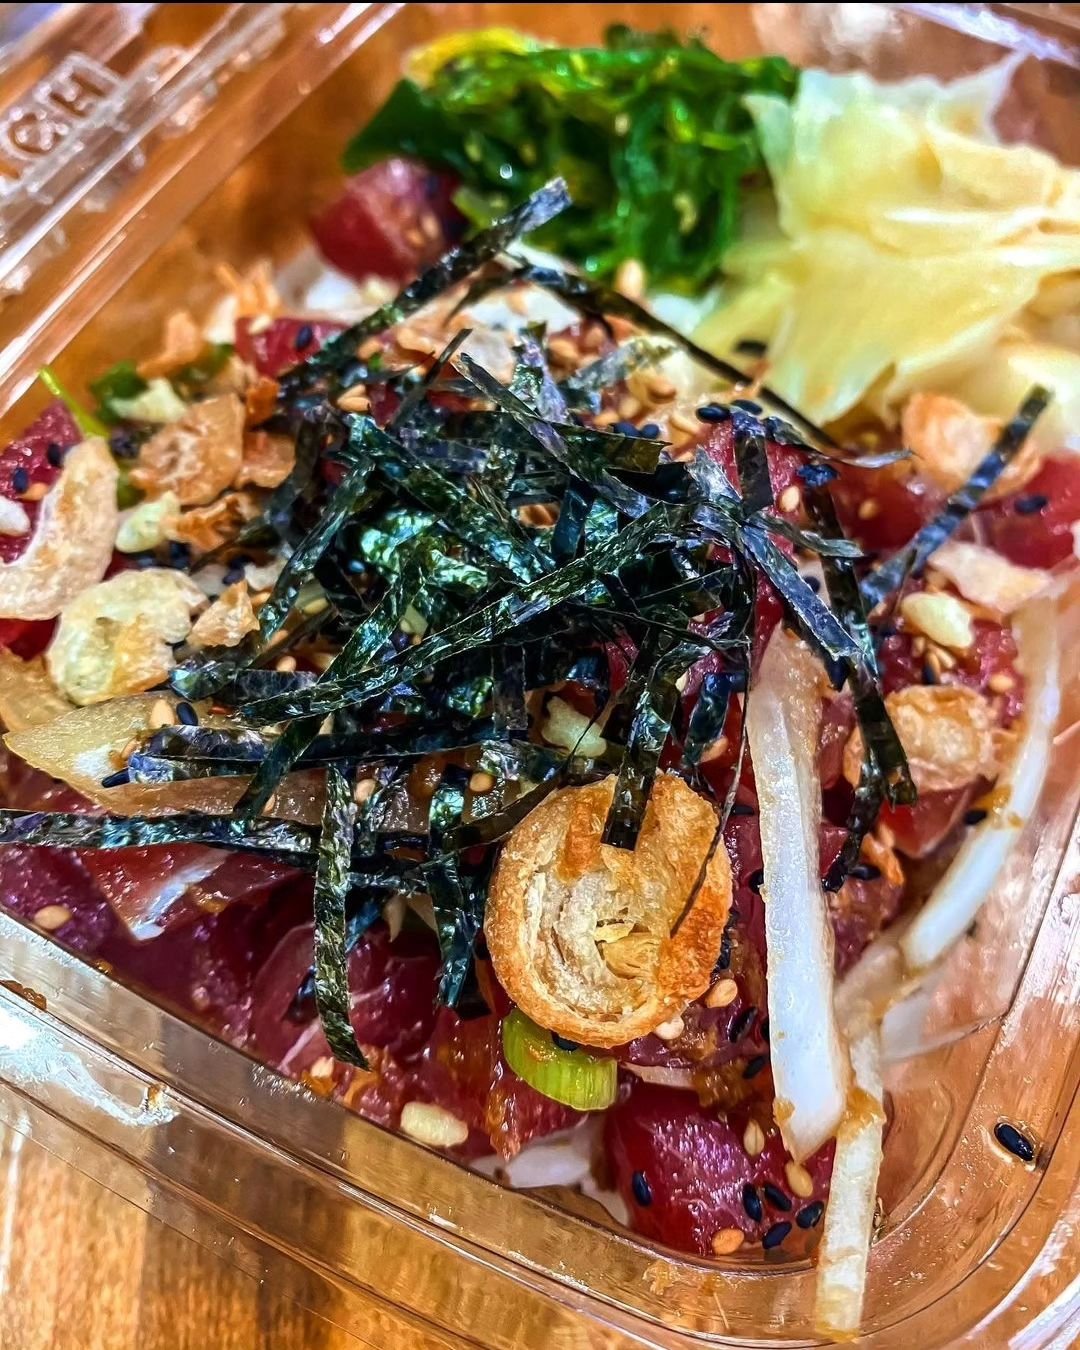 Poke? Yes, please! Because we offer wholesale, we get fresh fish delivered every day. It's never frozen, except our shrimp. We take that frsh fish and build made-to-order poke bowls just for you. Order them all day. 

🍚 this is our O'ahu poke bowl. 